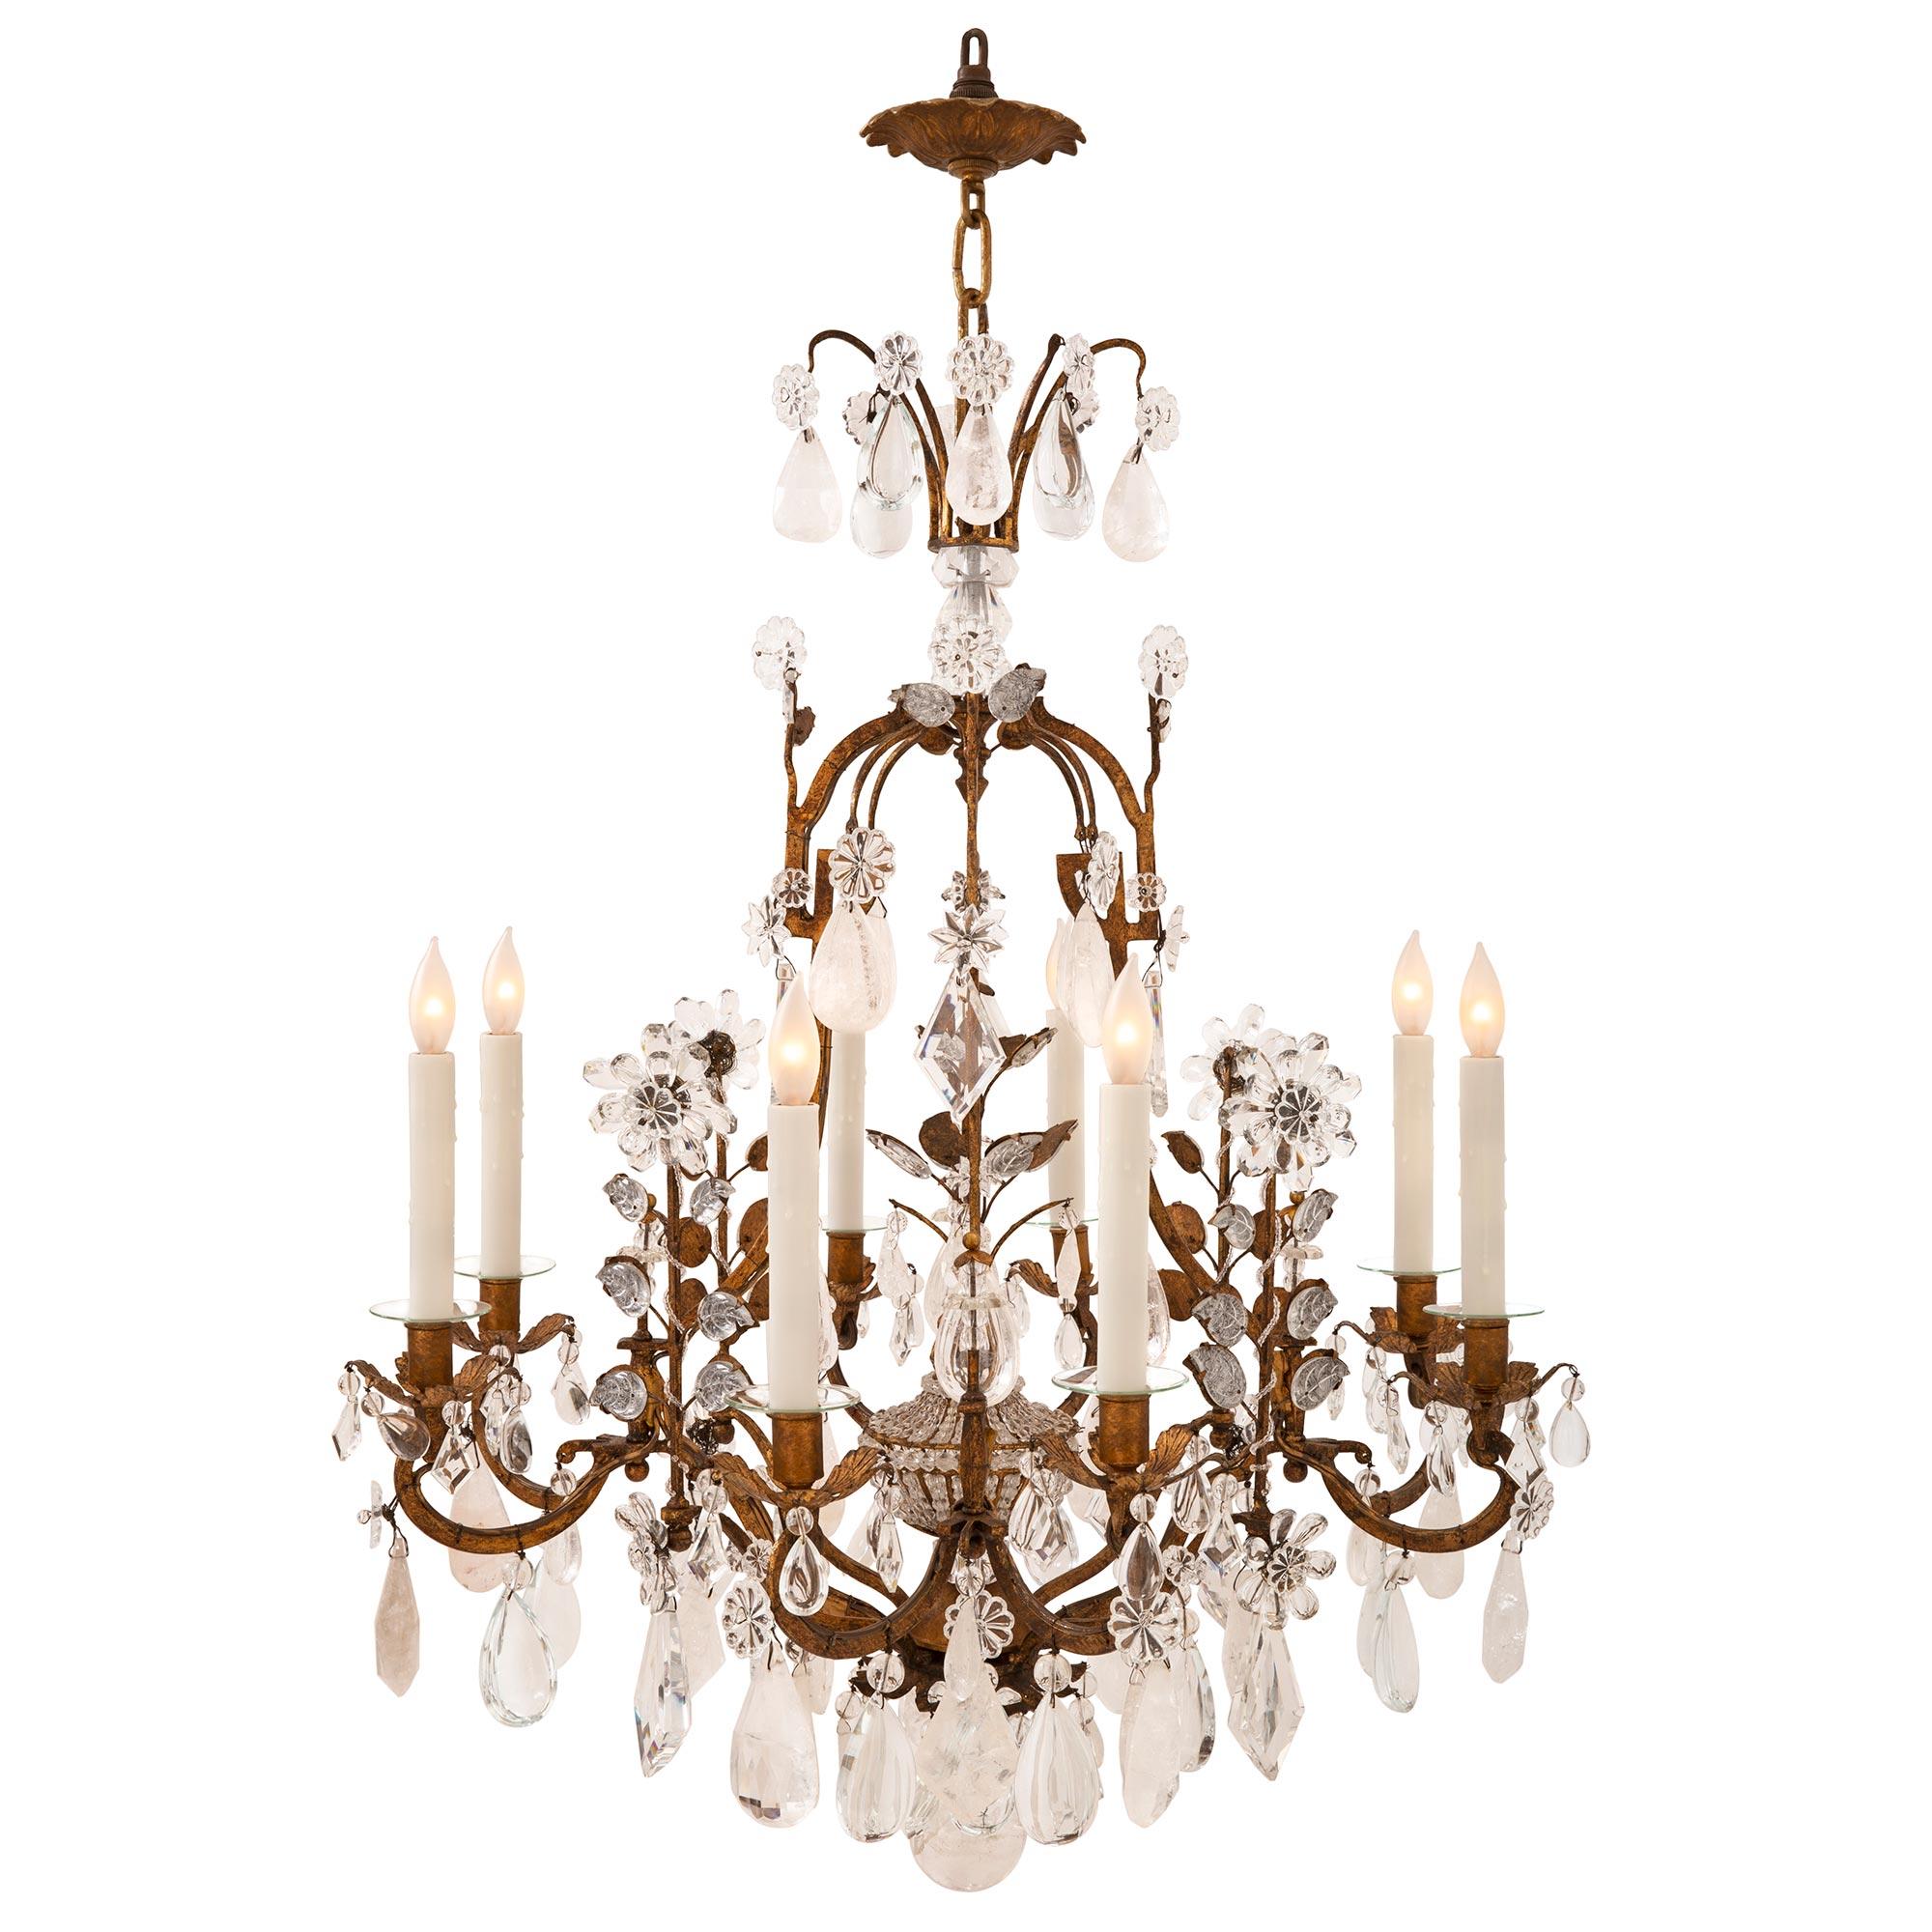 A charming and most decorative Italian 19th century Louis XVI St. gilt metal and rock crystal chandelier. The beautiful eight-light chandeliers are centered by a striking solid bottom rock crystal ball below an impressive array of cut rock crystal